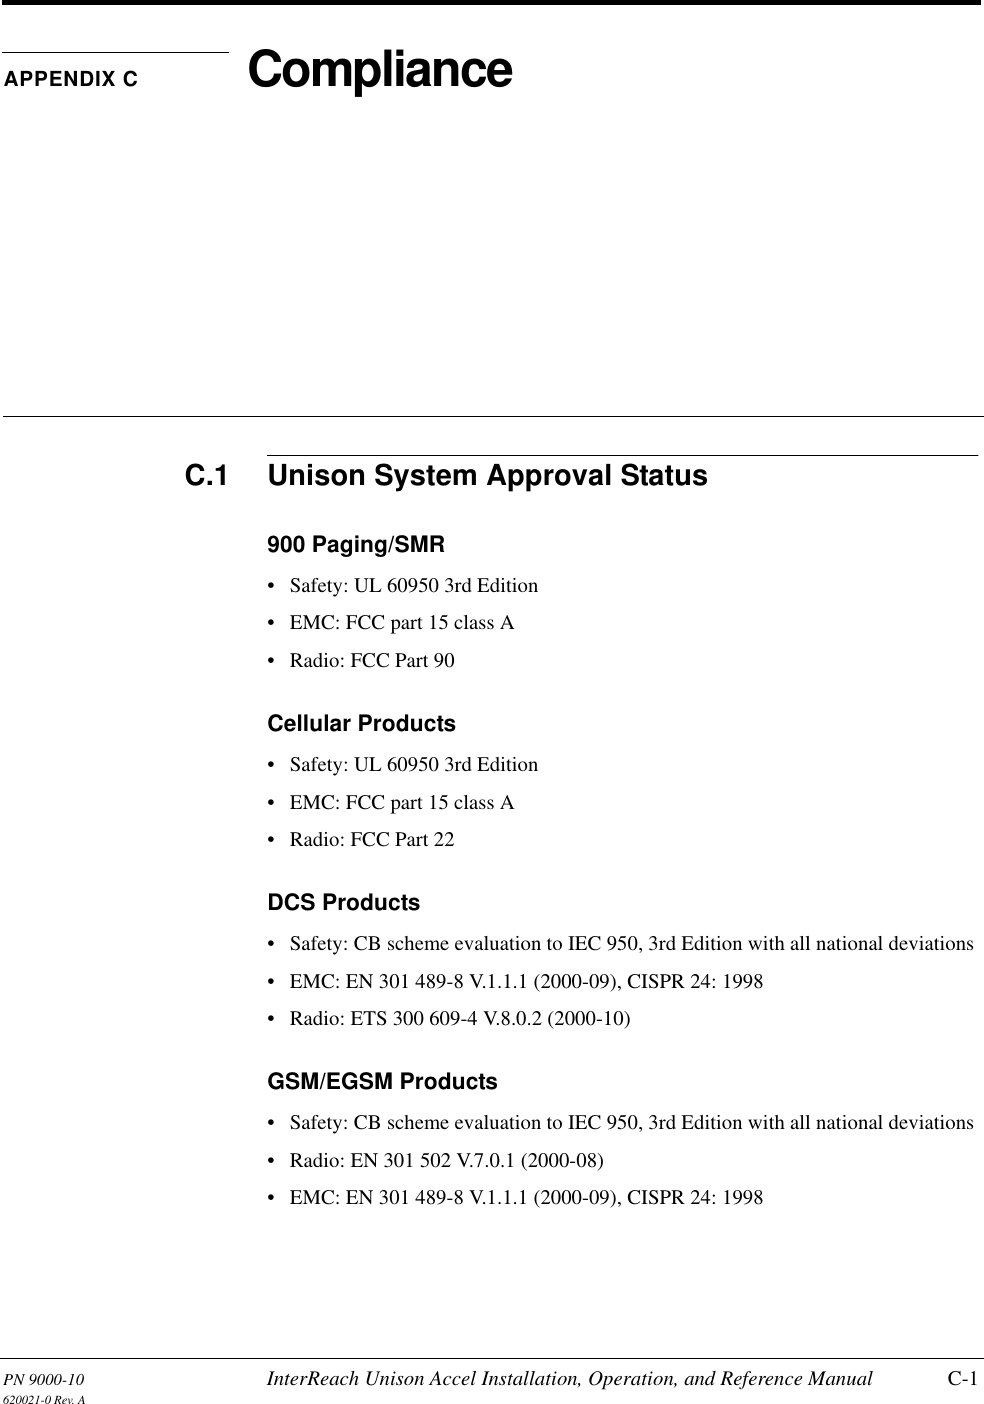 PN 9000-10 InterReach Unison Accel Installation, Operation, and Reference Manual C-1620021-0 Rev. AAPPENDIX C ComplianceC.1 Unison System Approval Status900 Paging/SMR• Safety: UL 60950 3rd Edition• EMC: FCC part 15 class A• Radio: FCC Part 90Cellular Products• Safety: UL 60950 3rd Edition• EMC: FCC part 15 class A• Radio: FCC Part 22DCS Products• Safety: CB scheme evaluation to IEC 950, 3rd Edition with all national deviations• EMC: EN 301 489-8 V.1.1.1 (2000-09), CISPR 24: 1998• Radio: ETS 300 609-4 V.8.0.2 (2000-10)GSM/EGSM Products• Safety: CB scheme evaluation to IEC 950, 3rd Edition with all national deviations• Radio: EN 301 502 V.7.0.1 (2000-08)• EMC: EN 301 489-8 V.1.1.1 (2000-09), CISPR 24: 1998